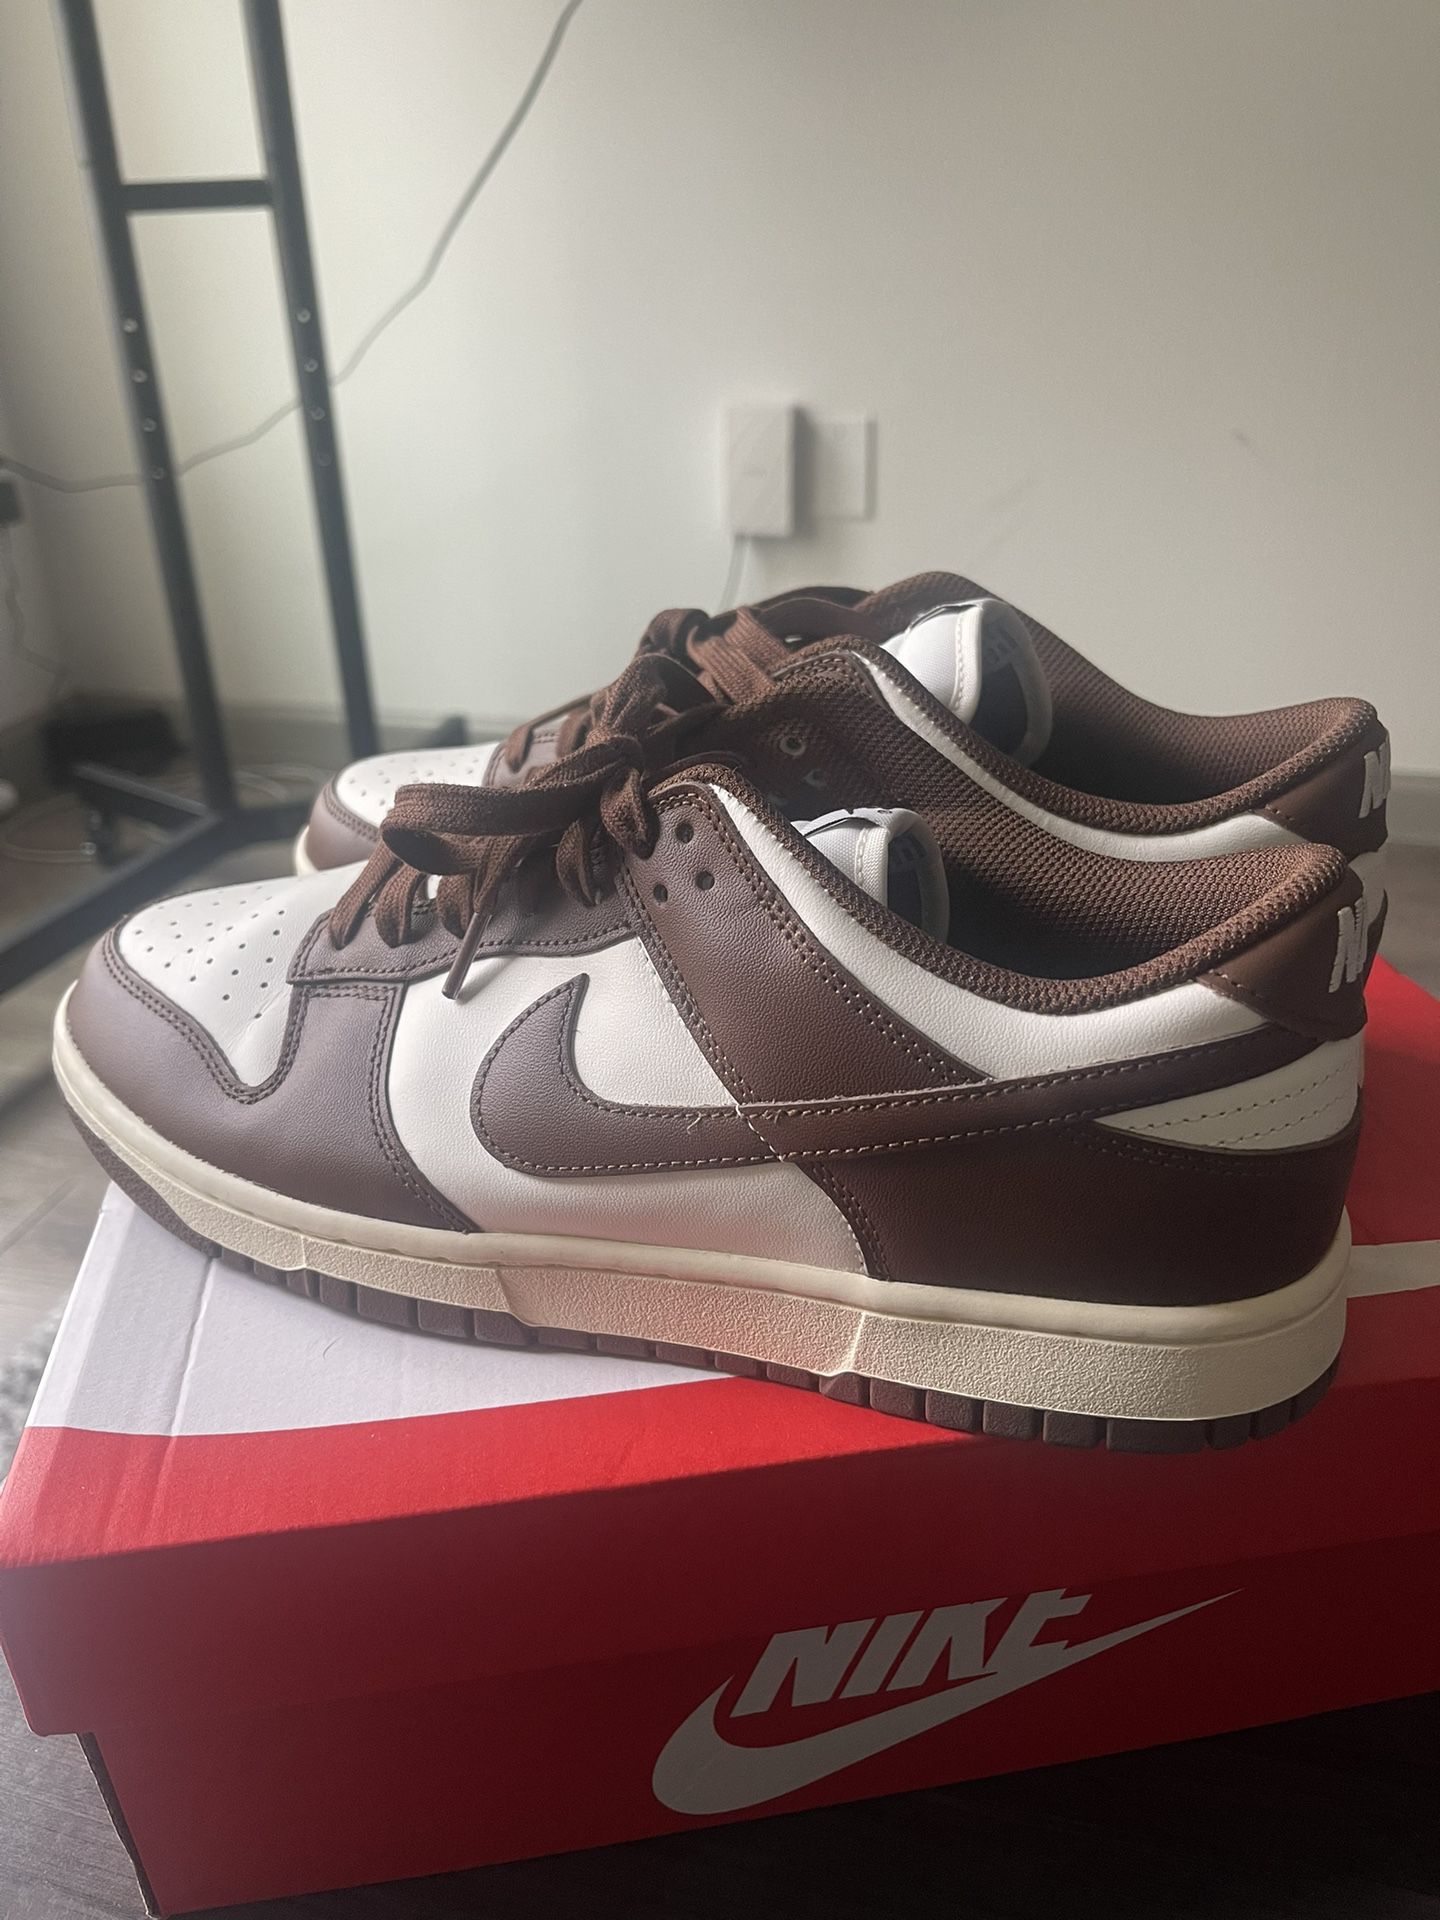 Nike Dunk Cacao Size 10.5M/12W